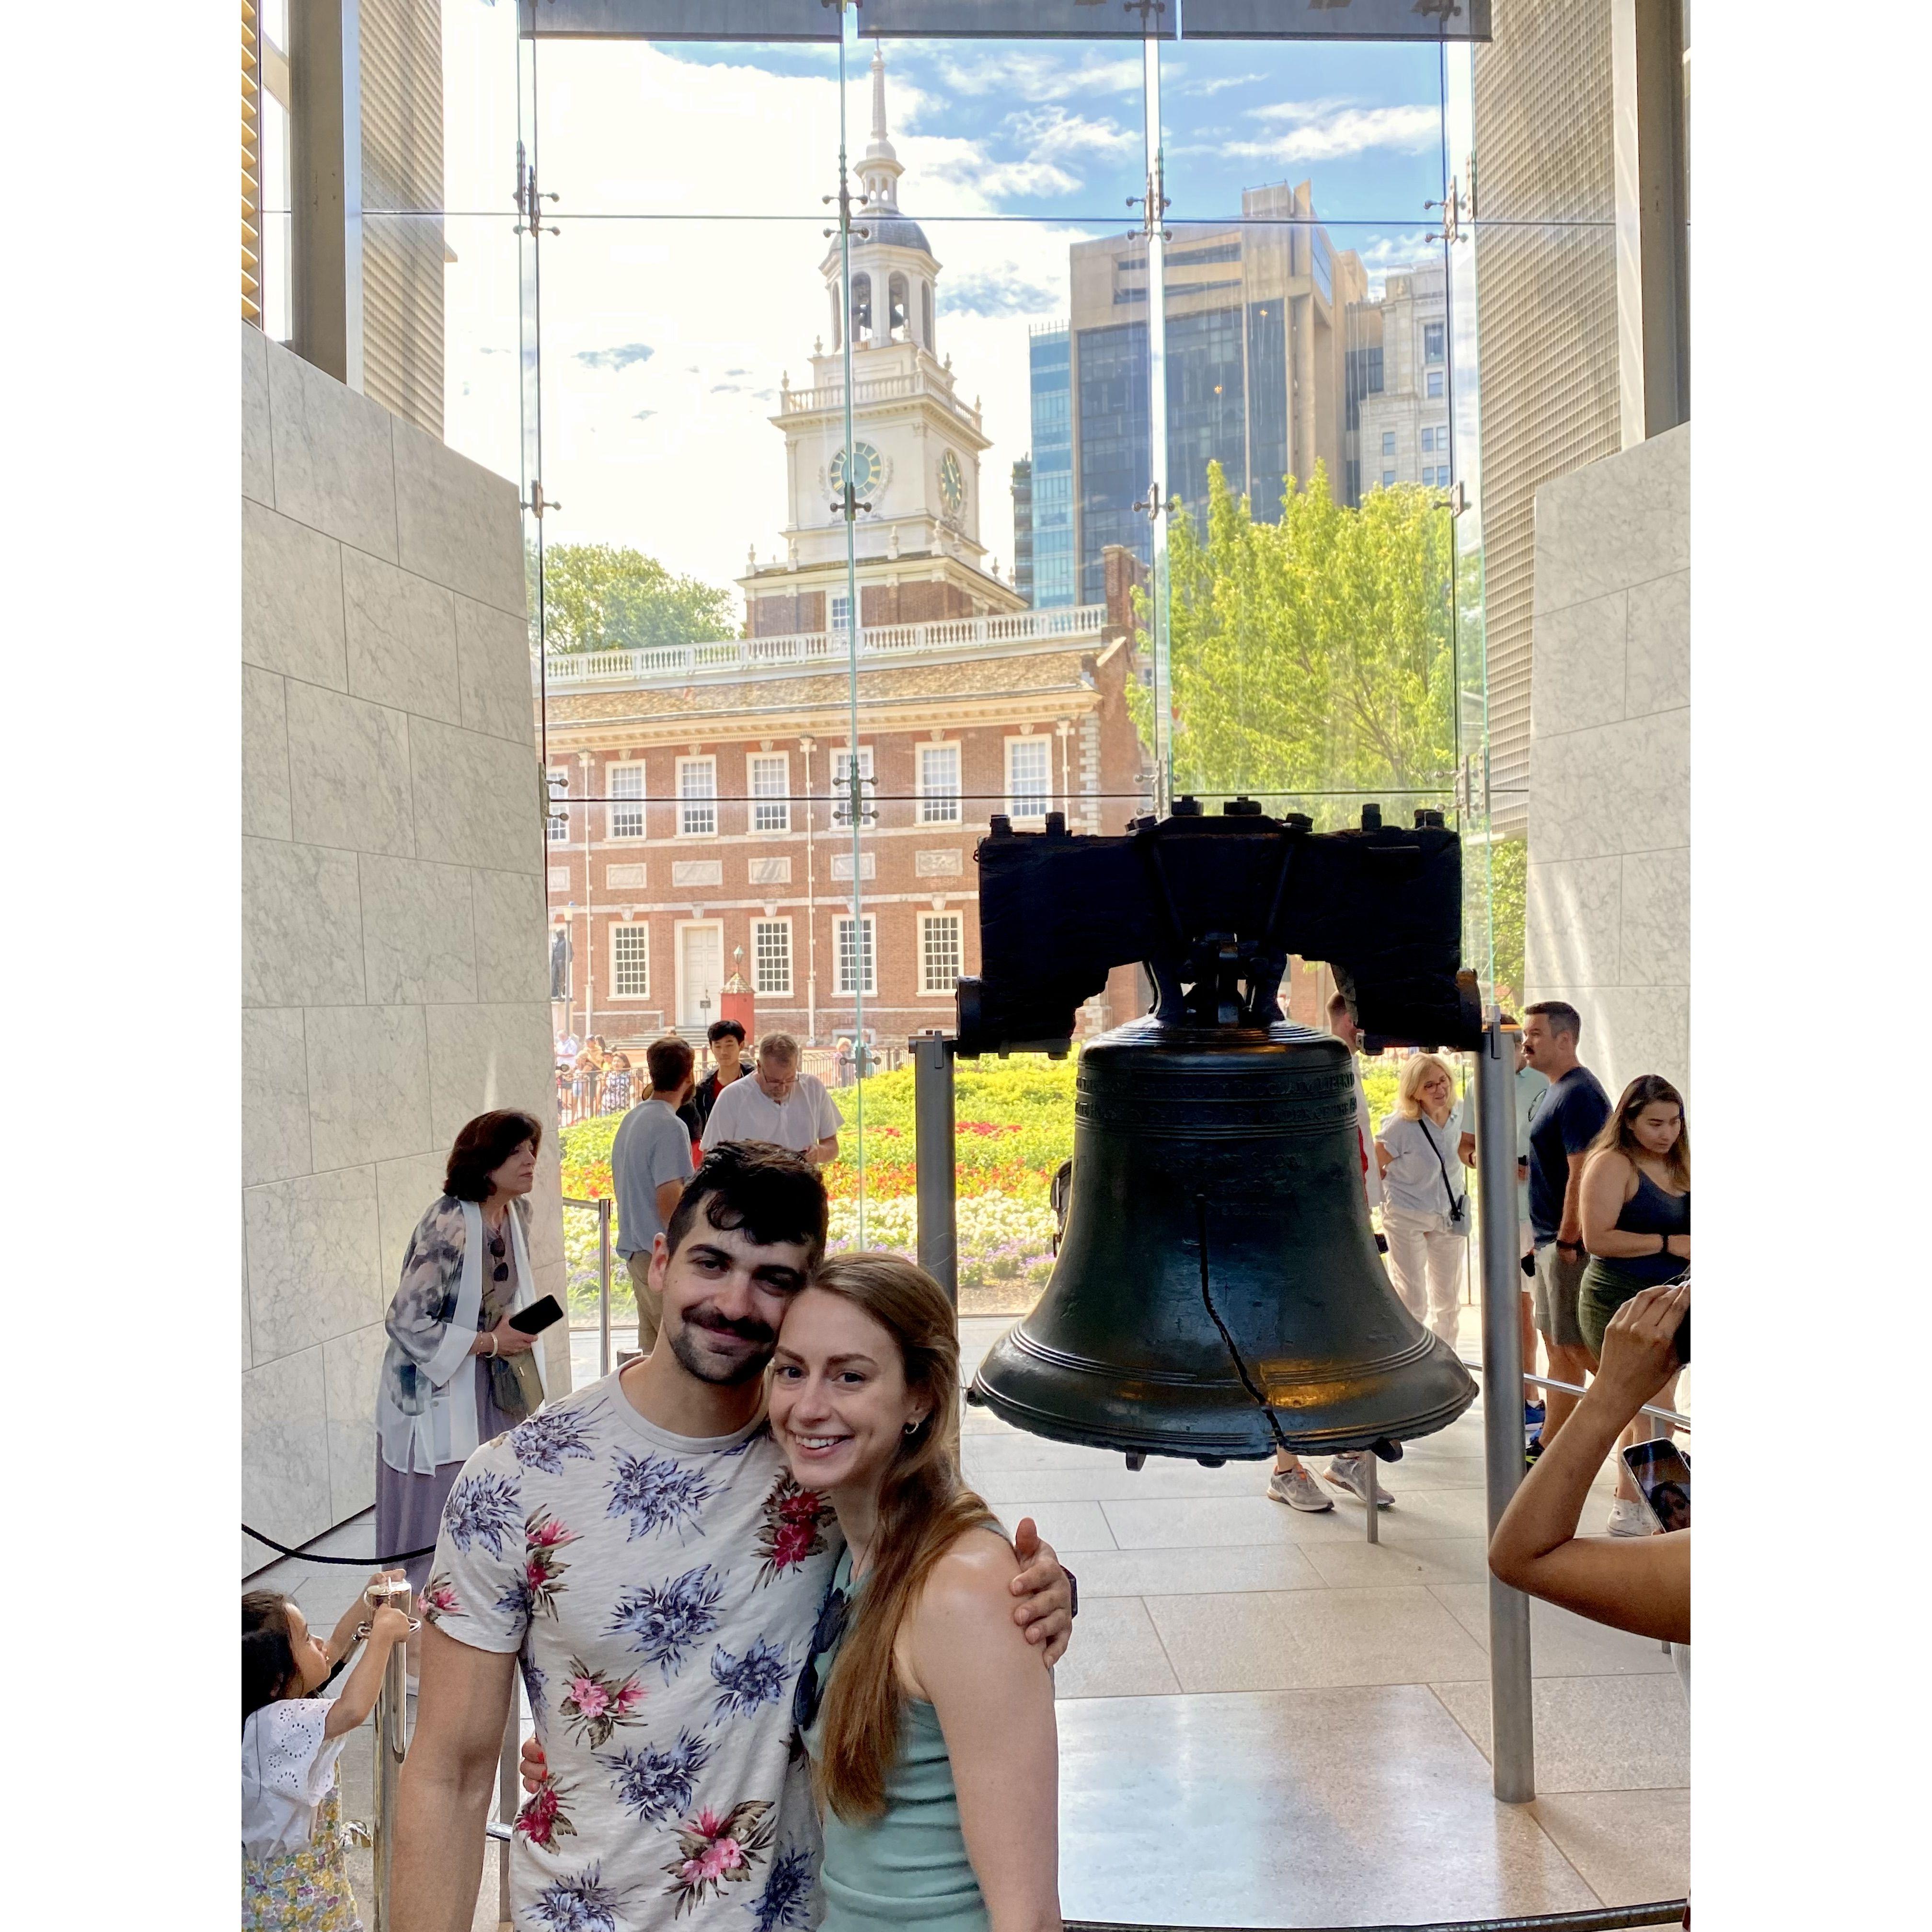 4th of July trip with a stop to see the Liberty Bell in Philadelphia